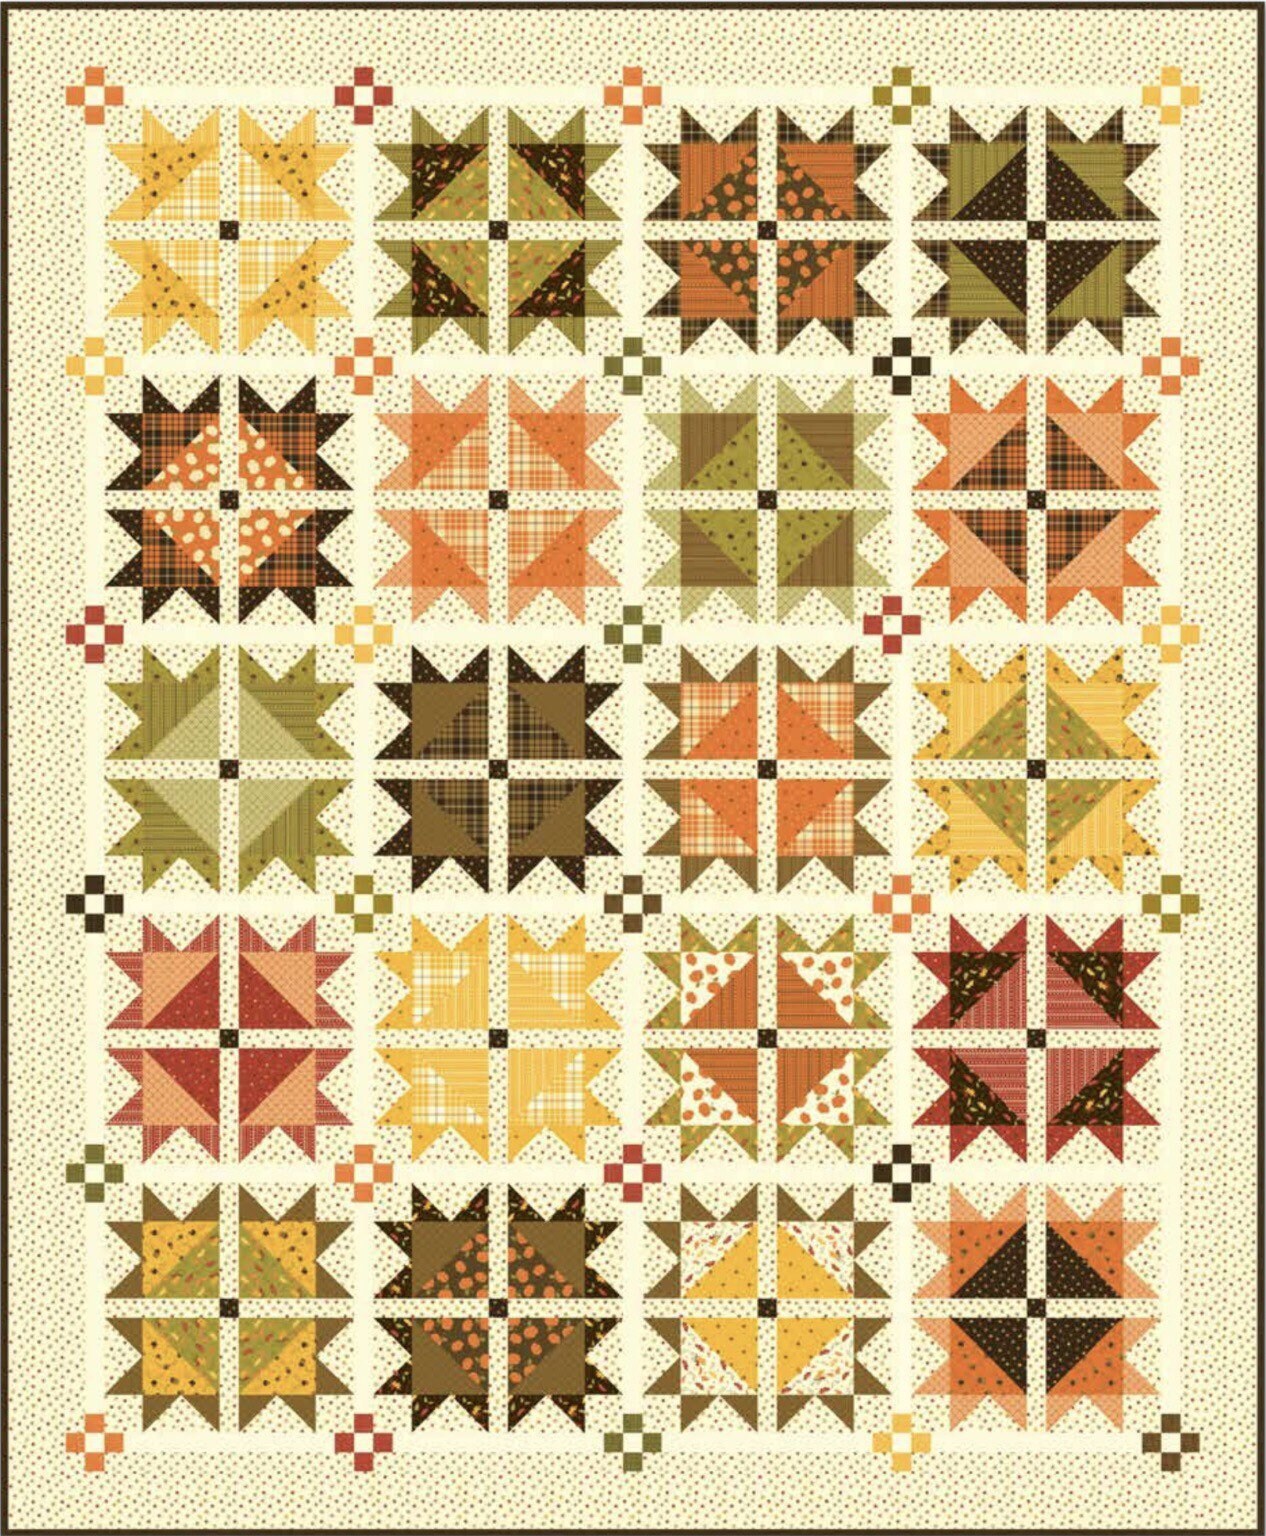 Fall is Calling Quilt Kit - Made with Awesome Autumn Fabric - Sandy Gervais - Finished Size 65” x 79” - Fall Fabric